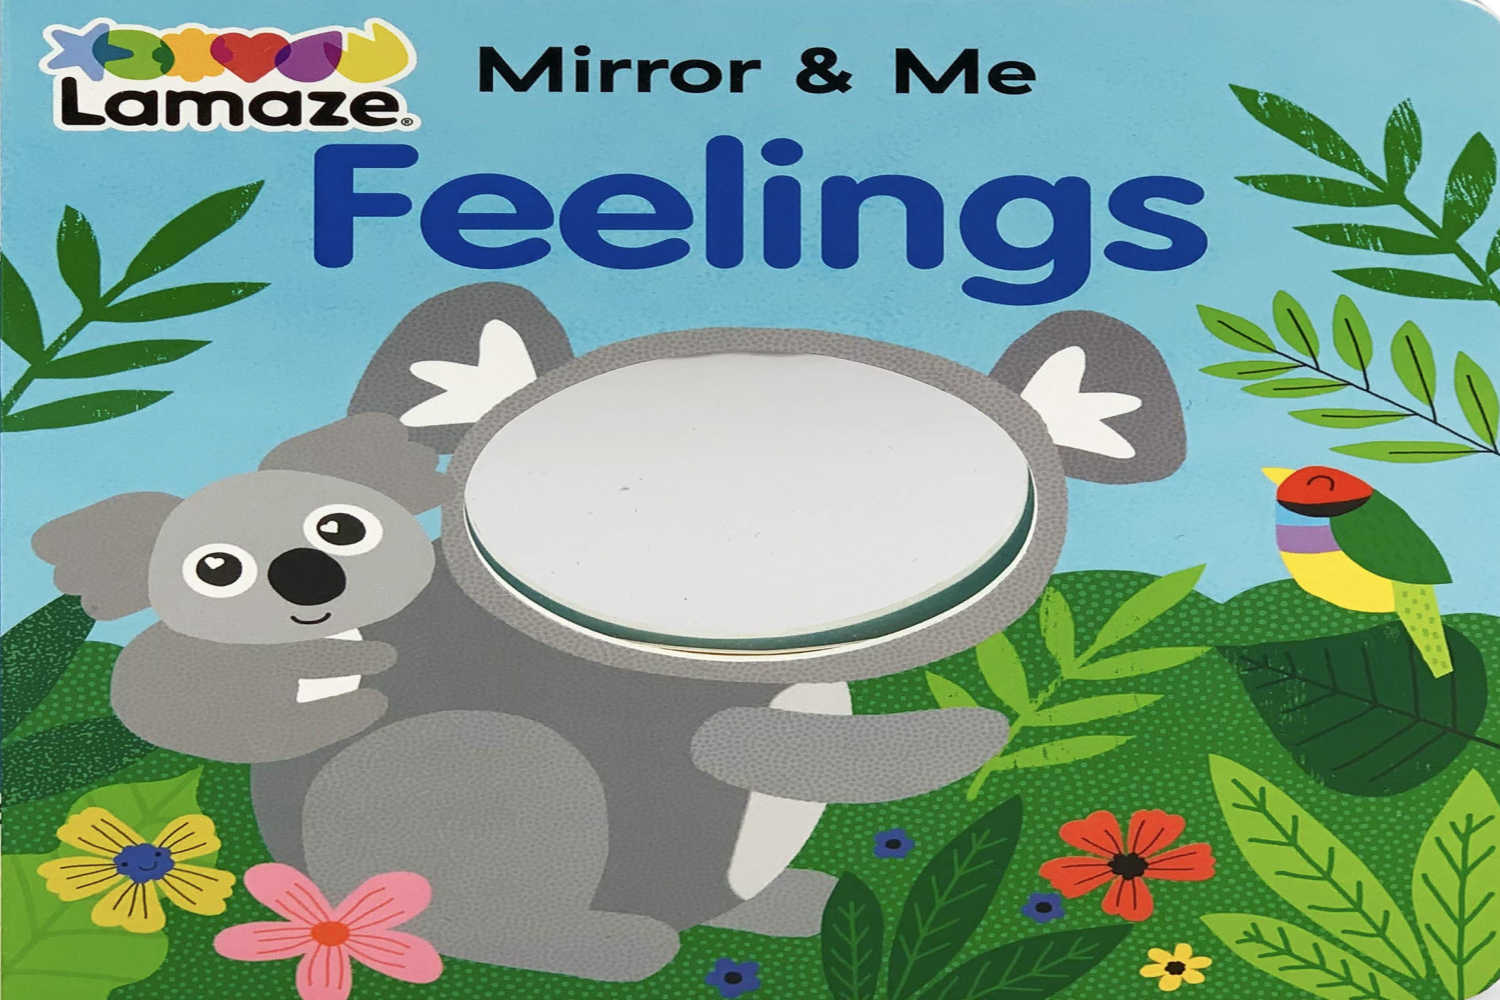 Mirror and Me Feelings by Rose Colombe